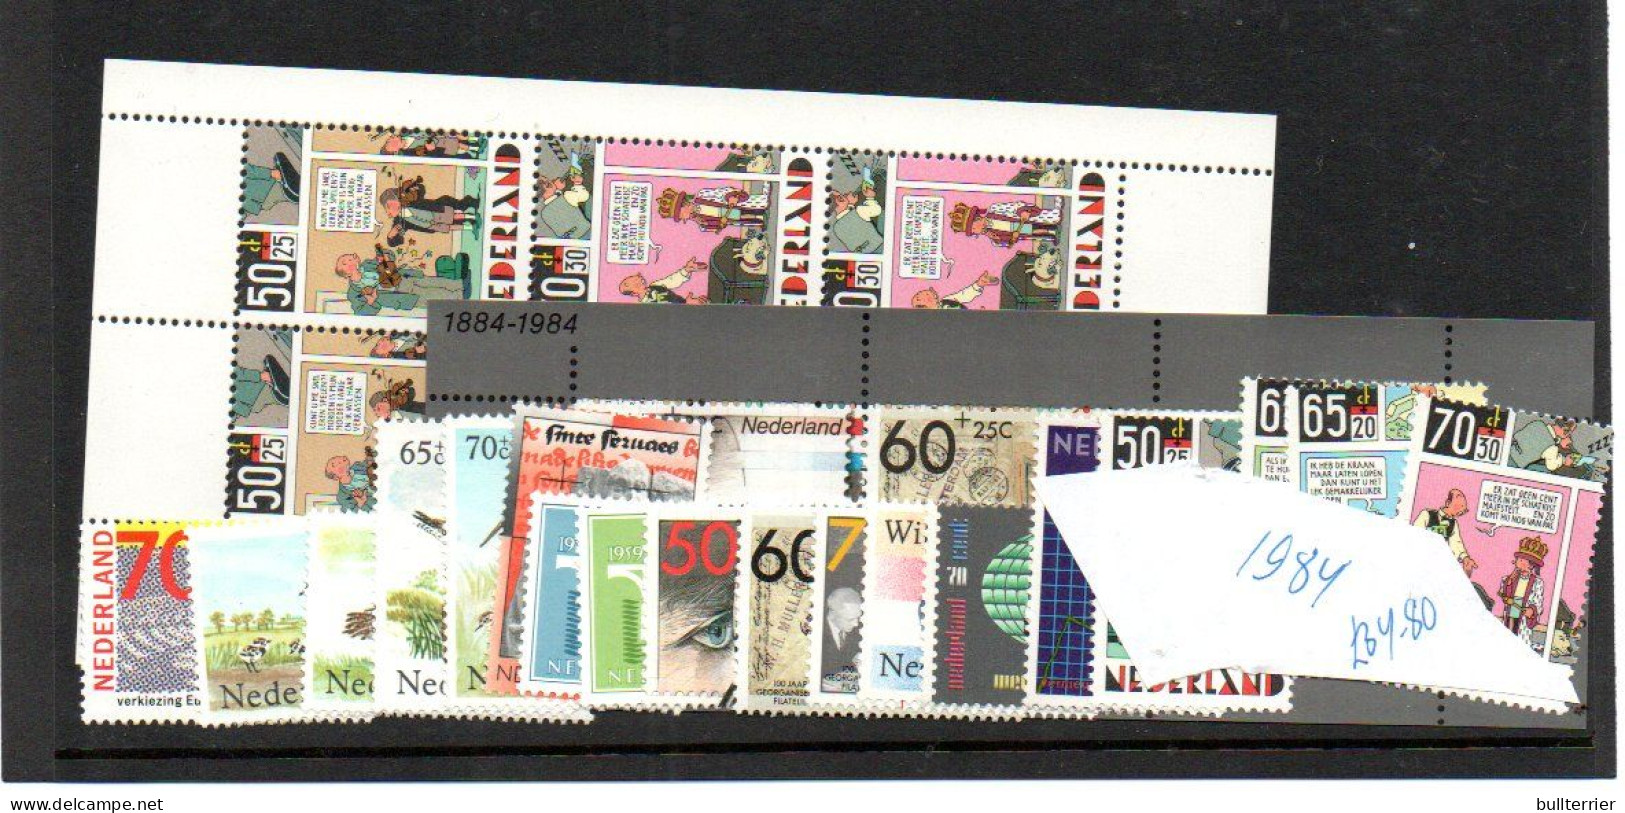 NETHERLANDS - 1984- ISSUE MINT NEVER HINGED  SG CAT £34.80 - Unused Stamps